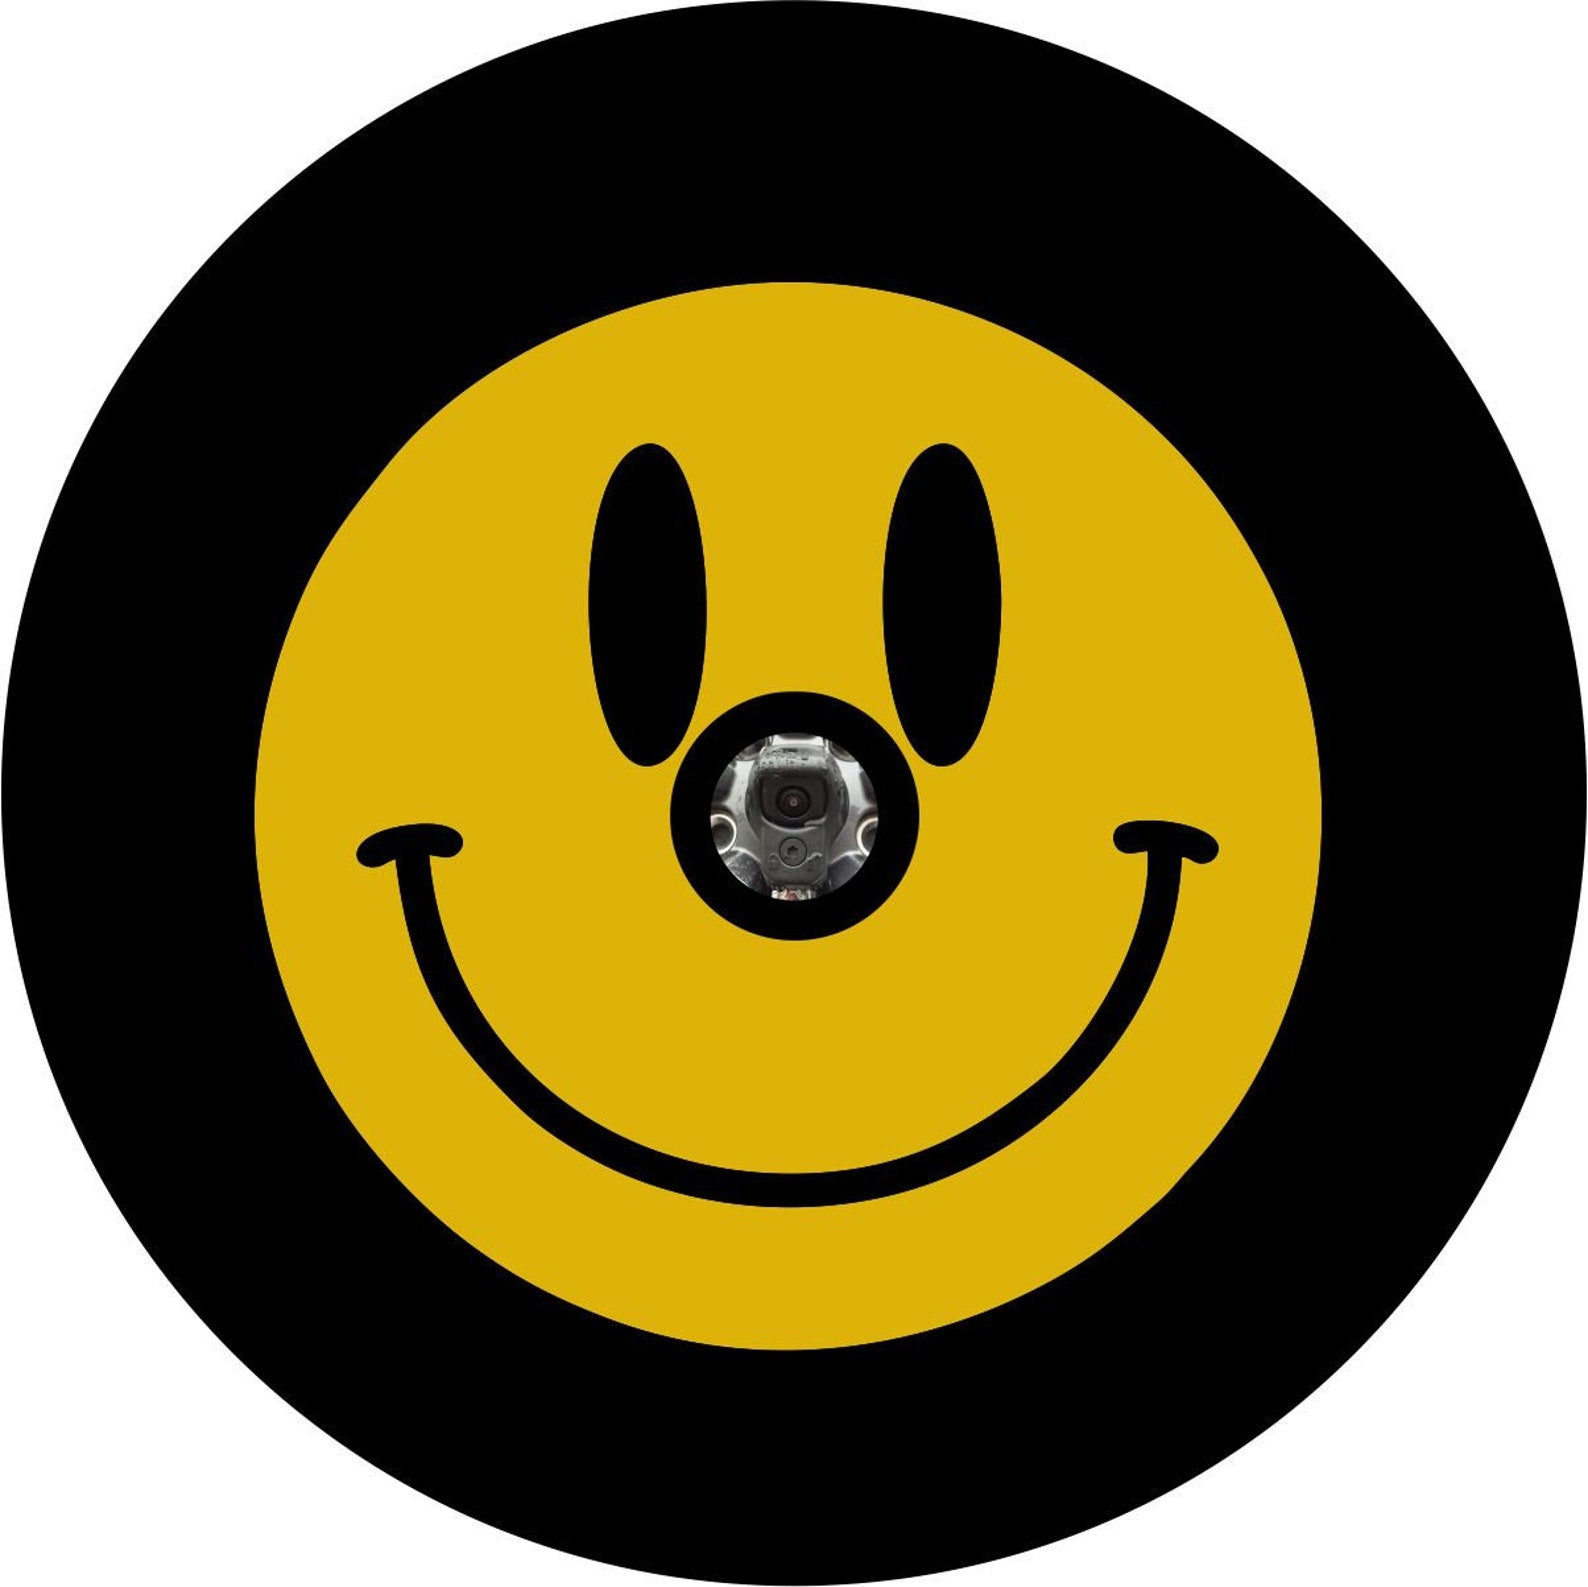 Black vinyl spare tire cover with a basic yellow smiley face and a back up camera design.